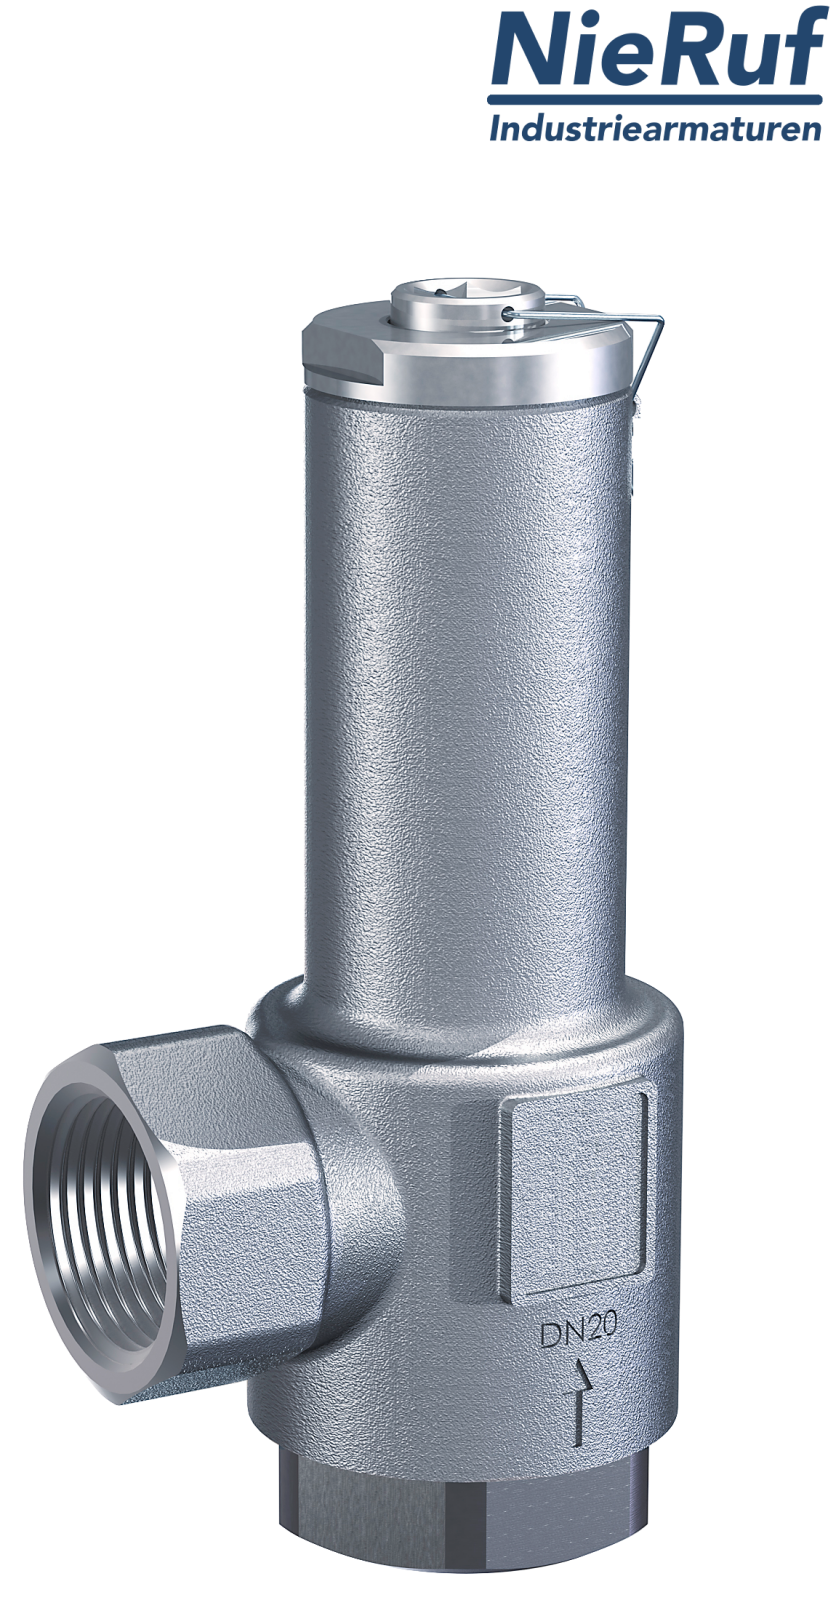 angle-type overflow valve 2" inch fm UV04 stainless steel AISI 316L 2 - 12 bar